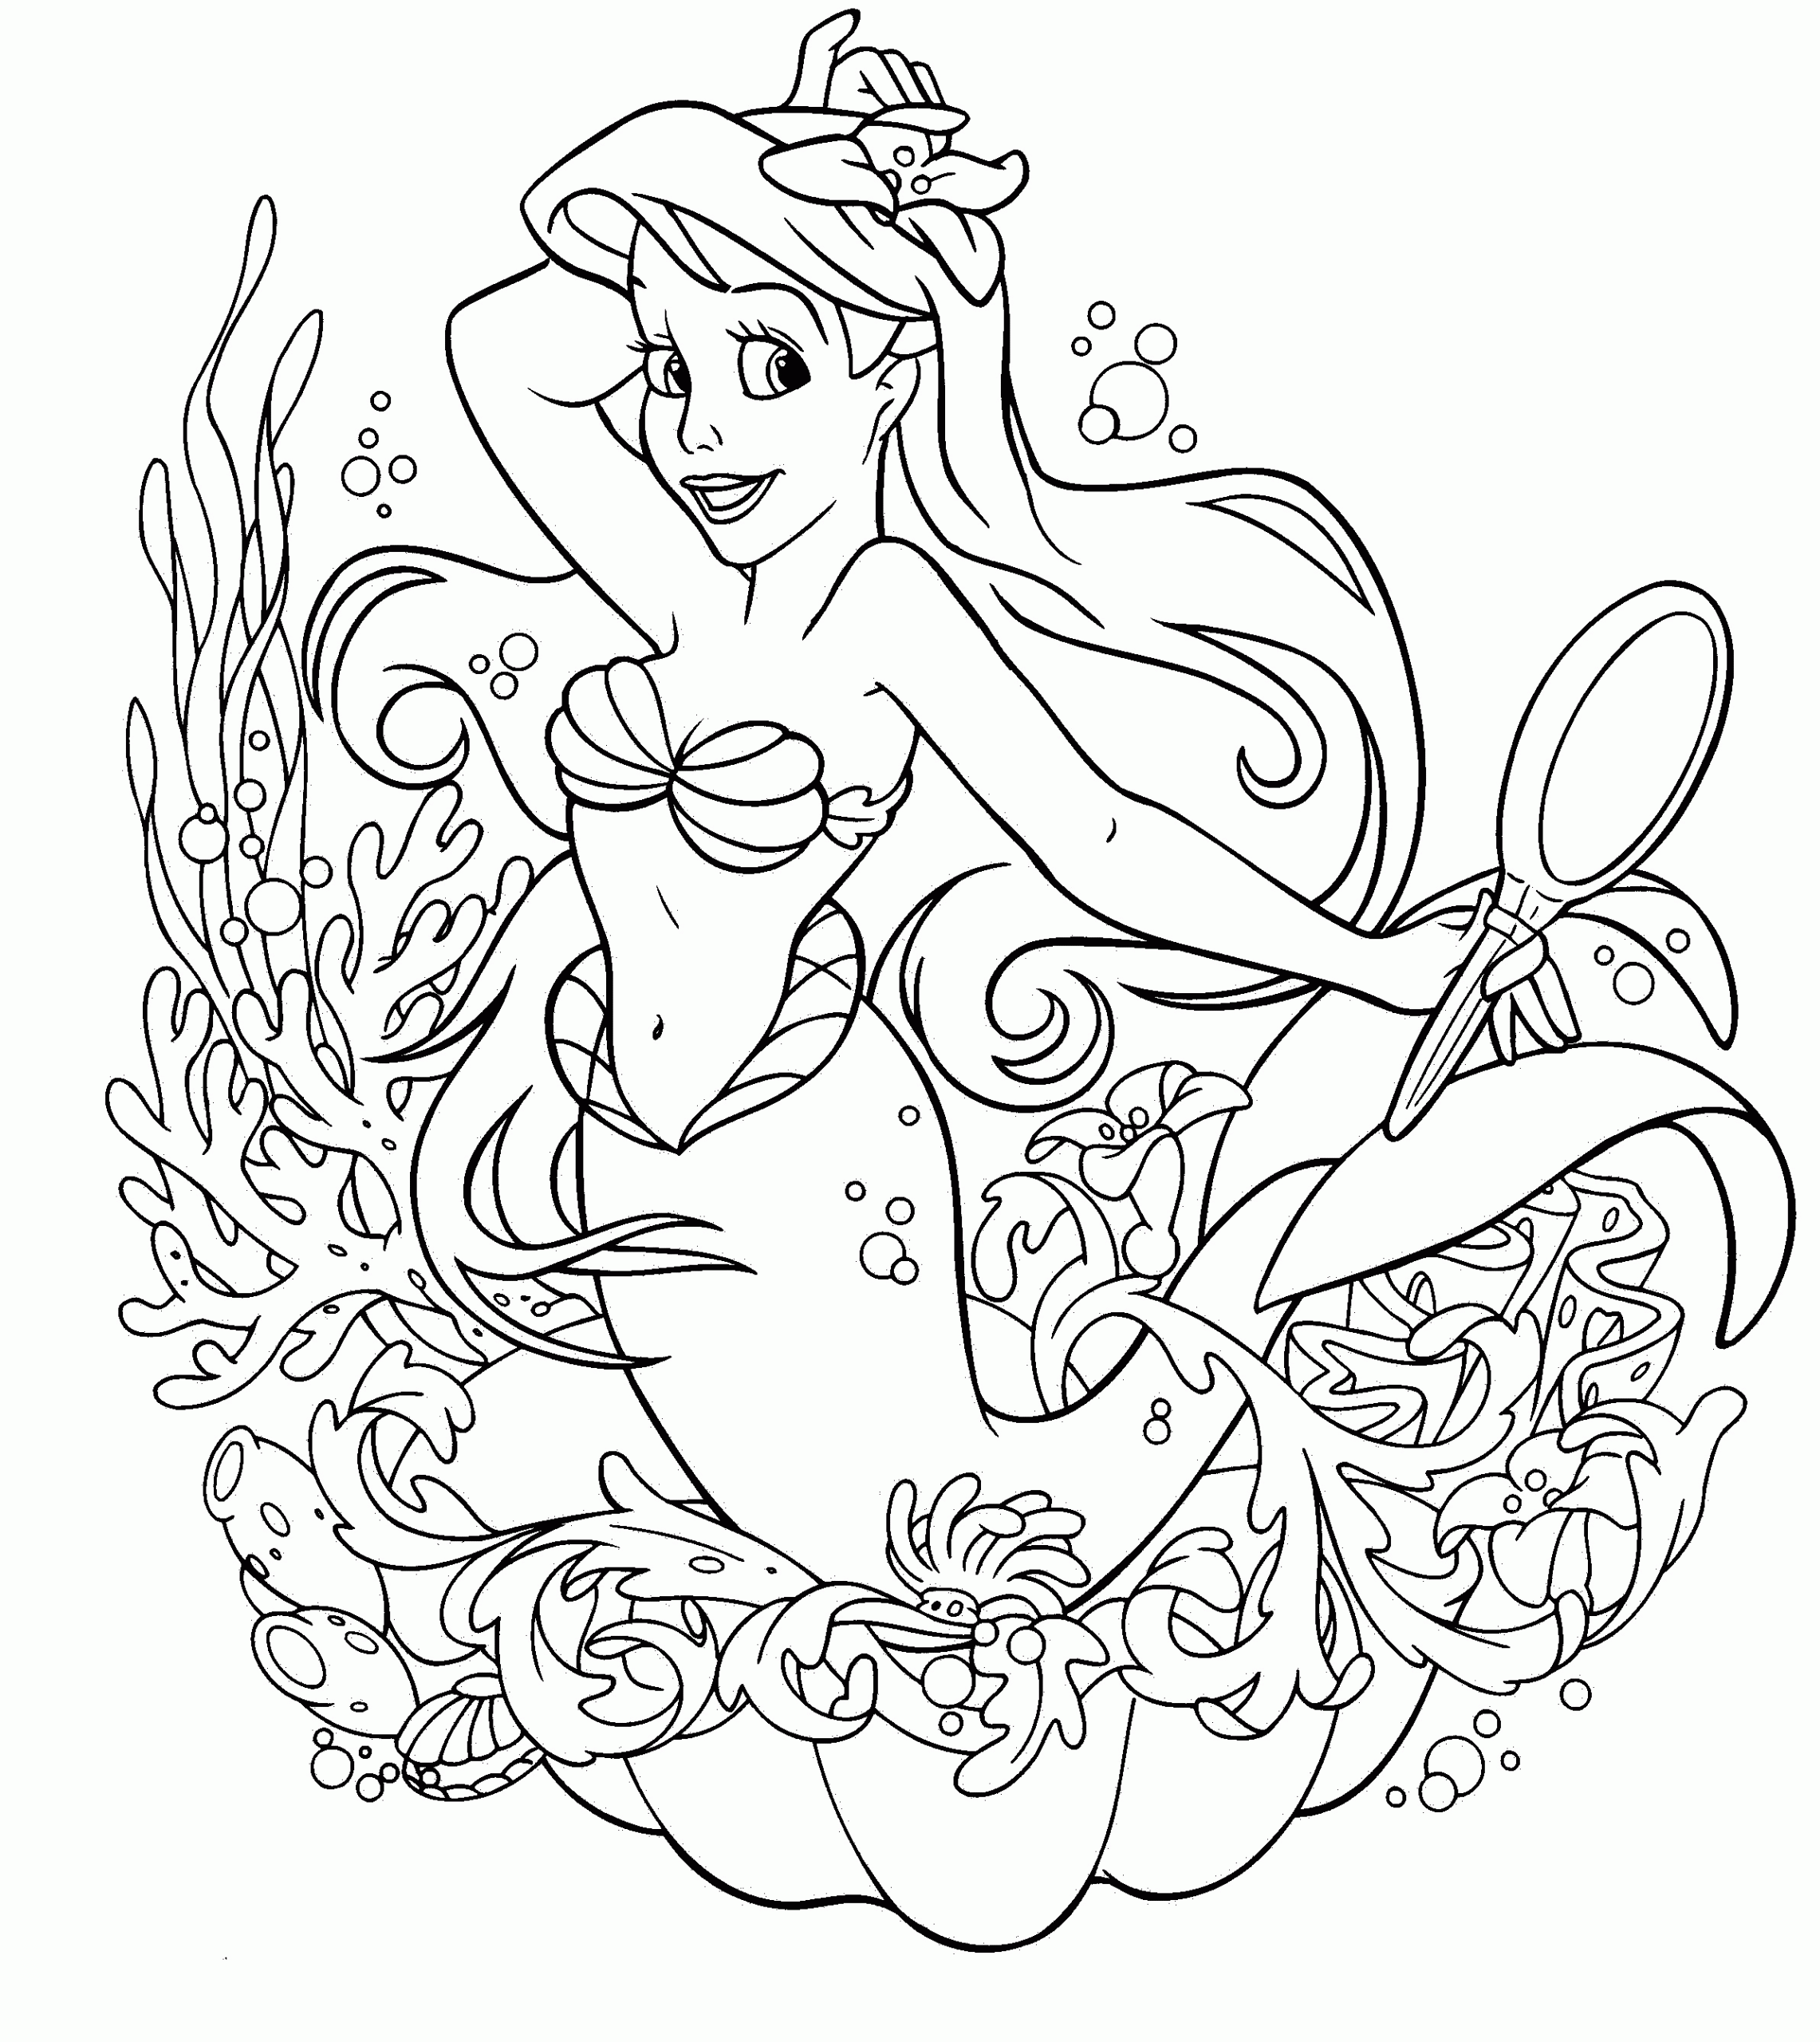 Coloring Pages Of Girls
 Coloring Pages for Girls Dr Odd